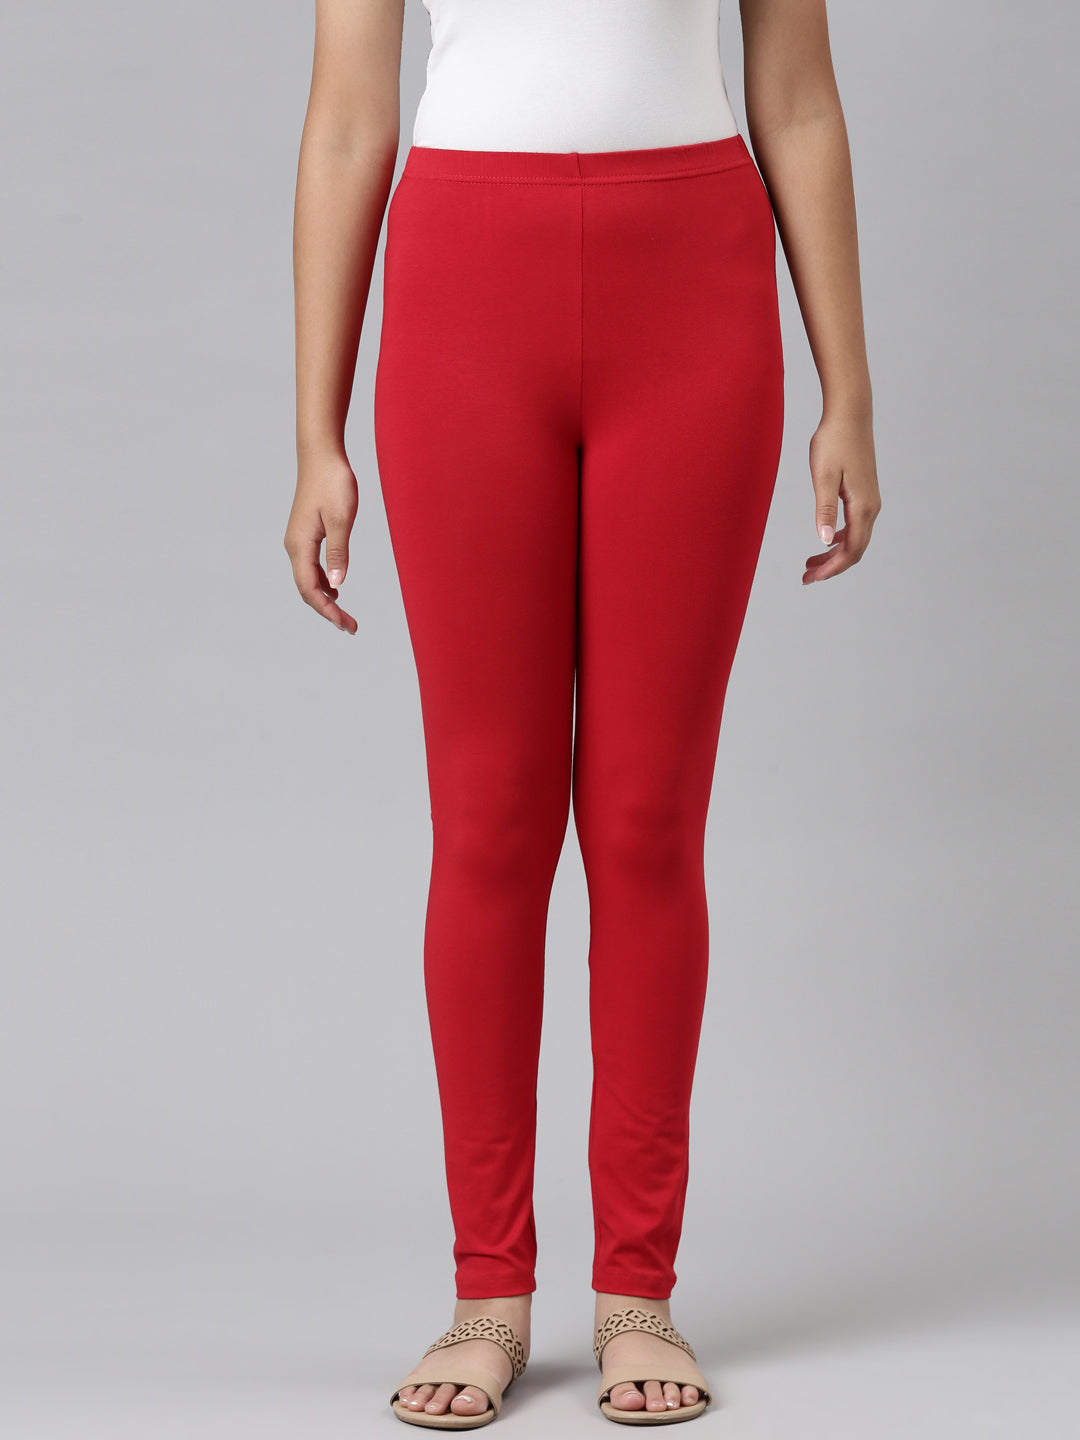 Buy Go Colors Straight Pants Online At Best Price Offers In India